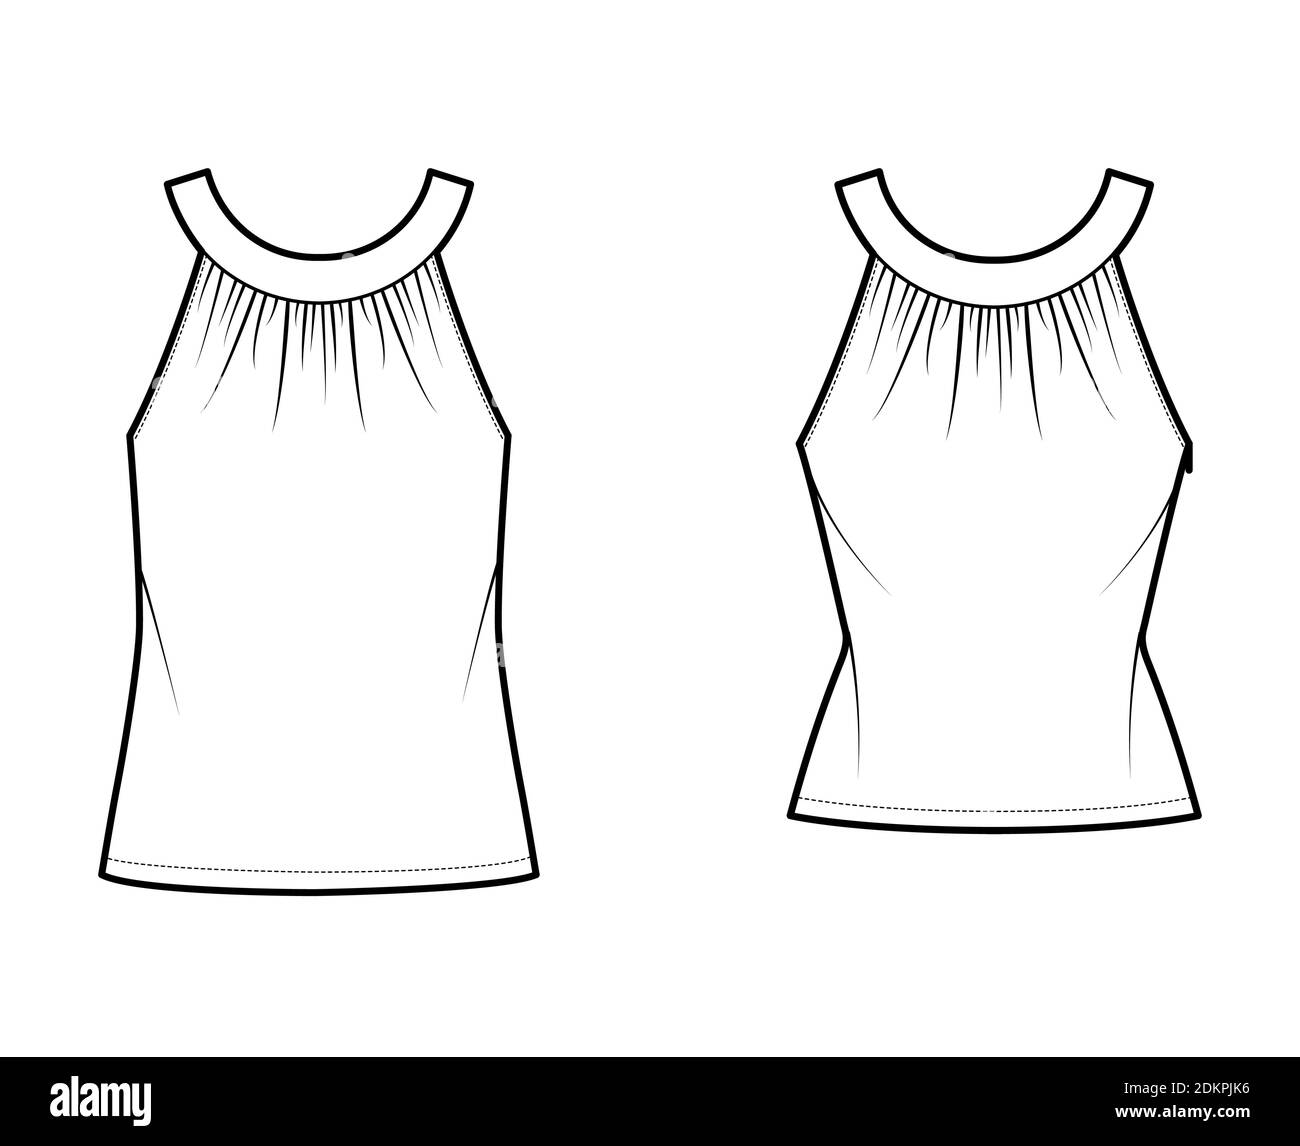 Set of Tops rounded neck band tank technical fashion illustration with ruching, fitted and oversized body, tunic length, button keyhole. Flat shirt template front white color. Women, unisex CAD mockup Stock Vector